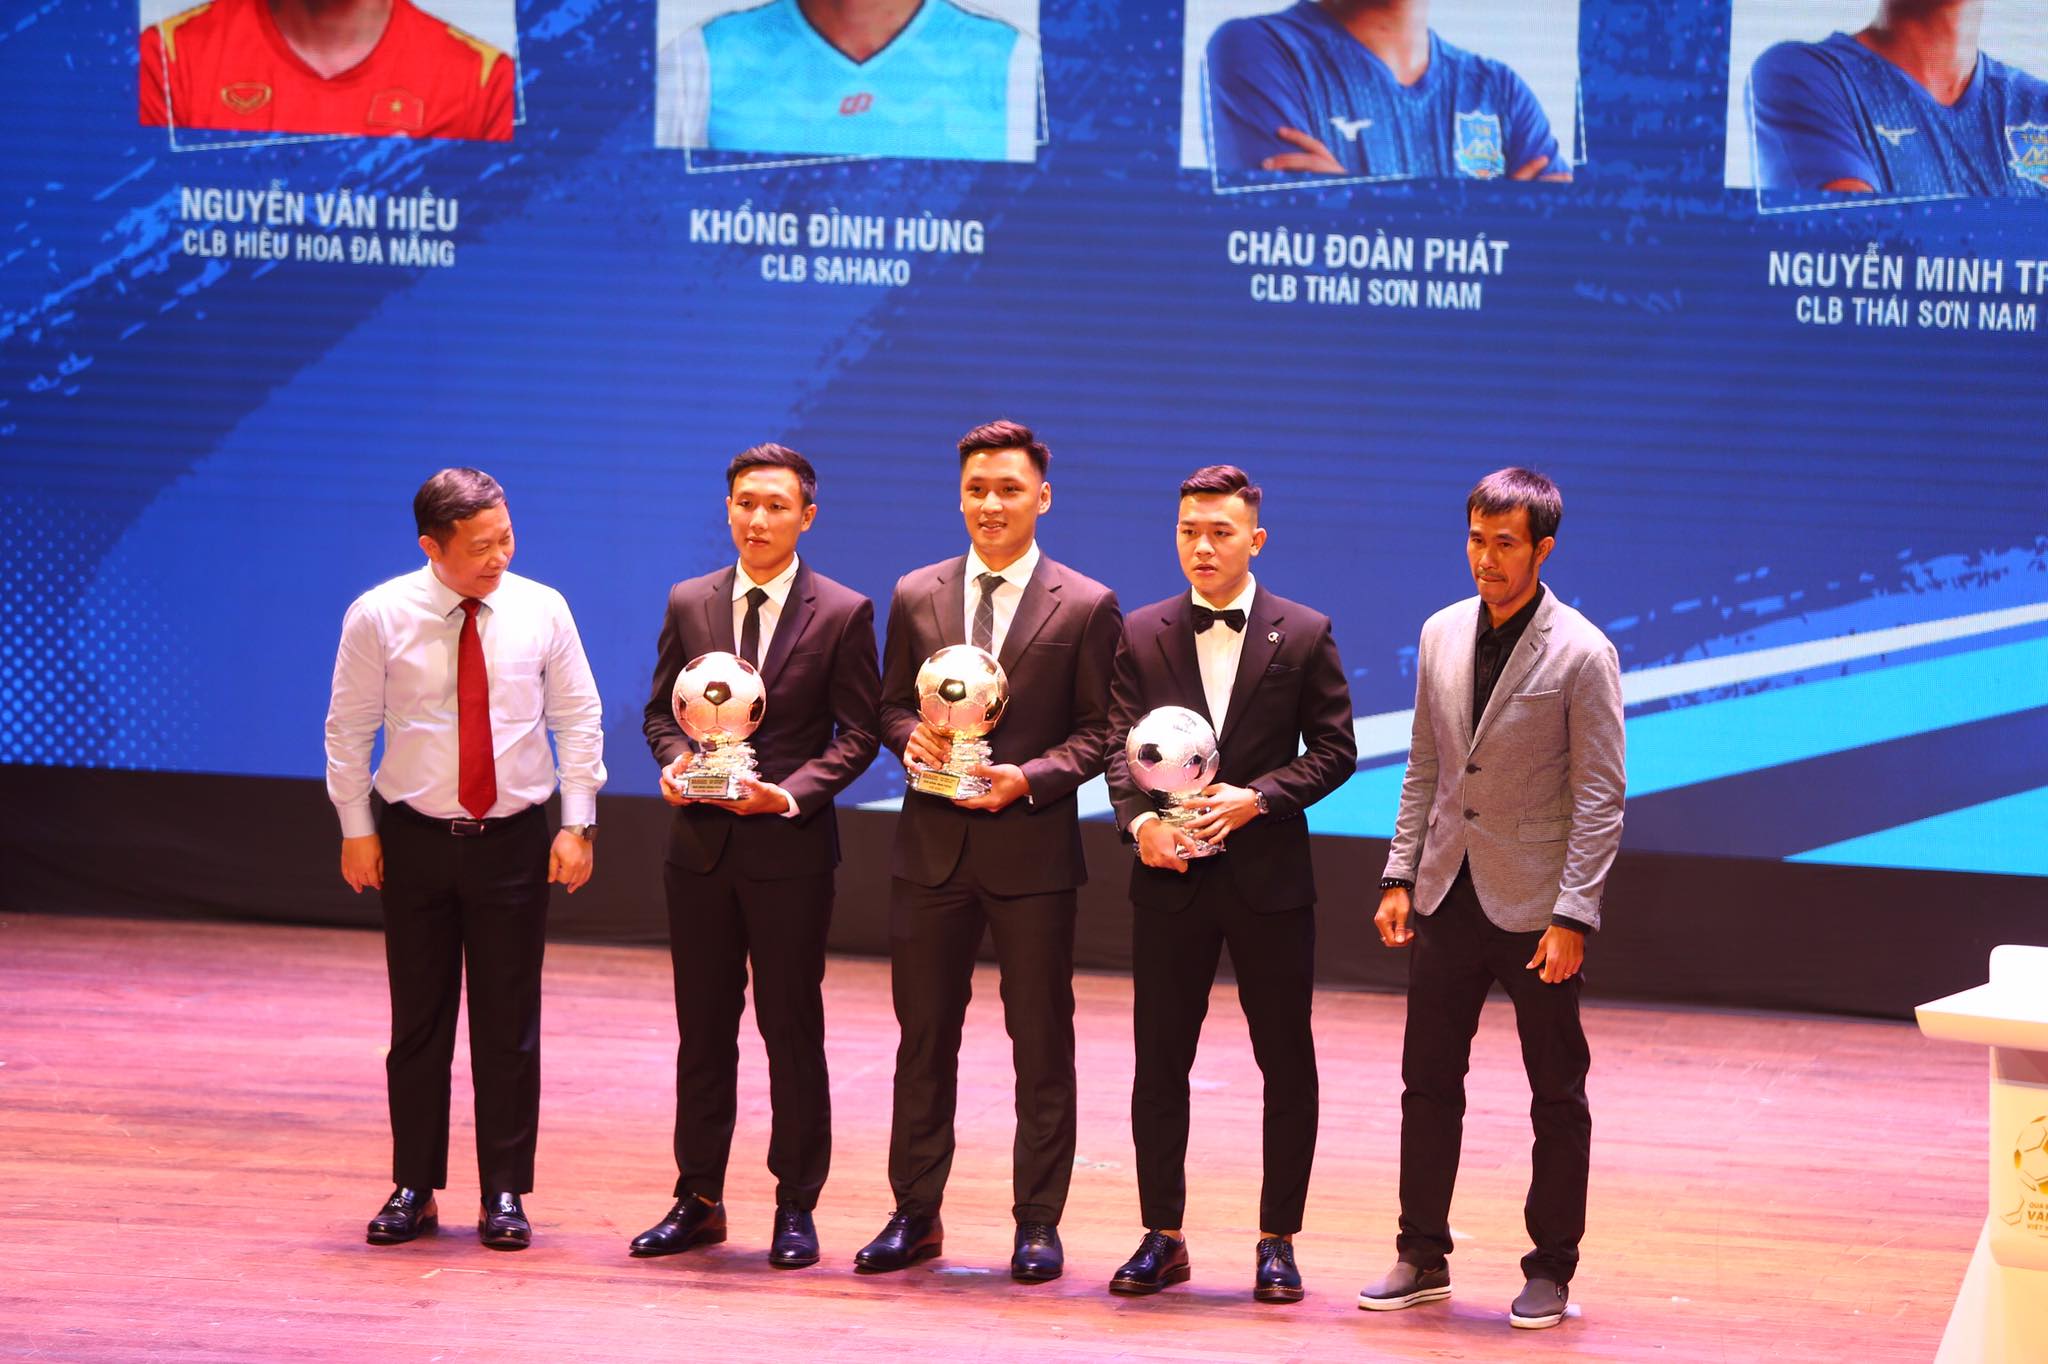 Ho Van Y (center), Chau Doan Phat (second right) and Nguyen Minh Tri (second left) win the futsal Golden, Silver and Bronze Ball awards, respectively, at a ceremony in Ho Chi Minh City, February 16, 2022. Photo: H. Tung / Tuoi Tre